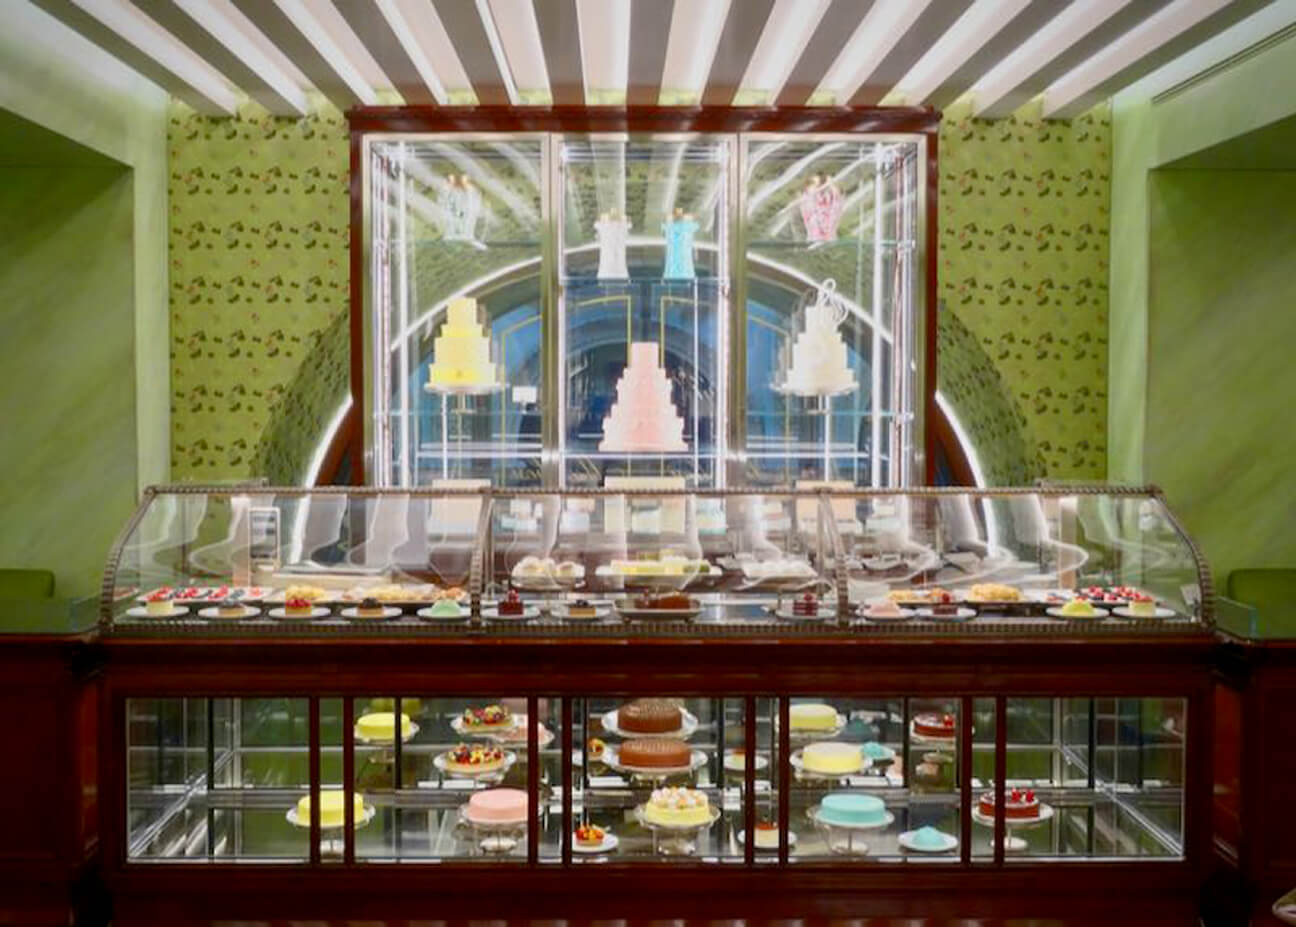 Spring green walls and dark wood and glass cases displaying colorful cakes and desserts at Marchesi 1824 in Milan.